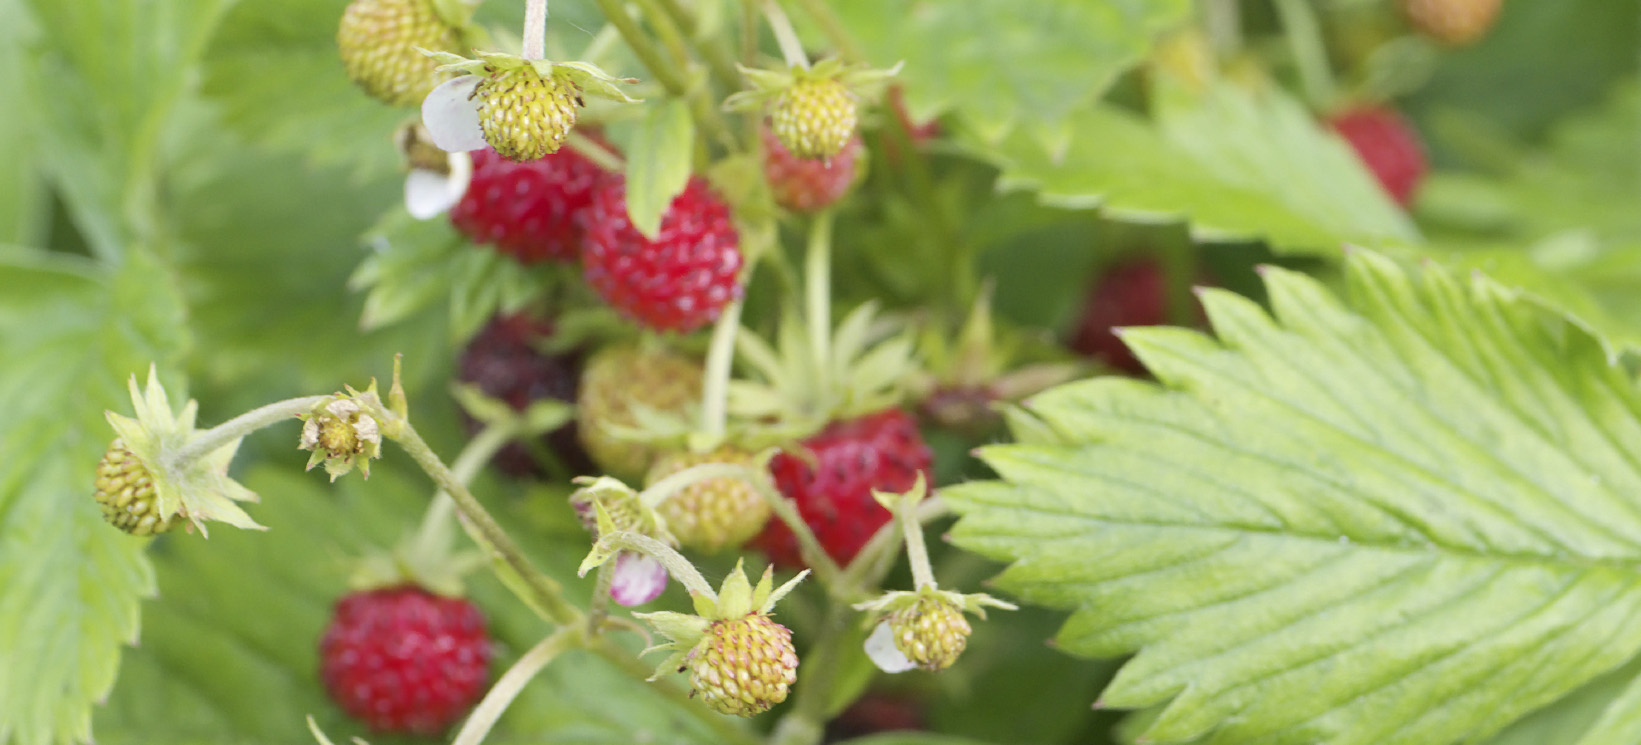 Close up picture of wild strawberries